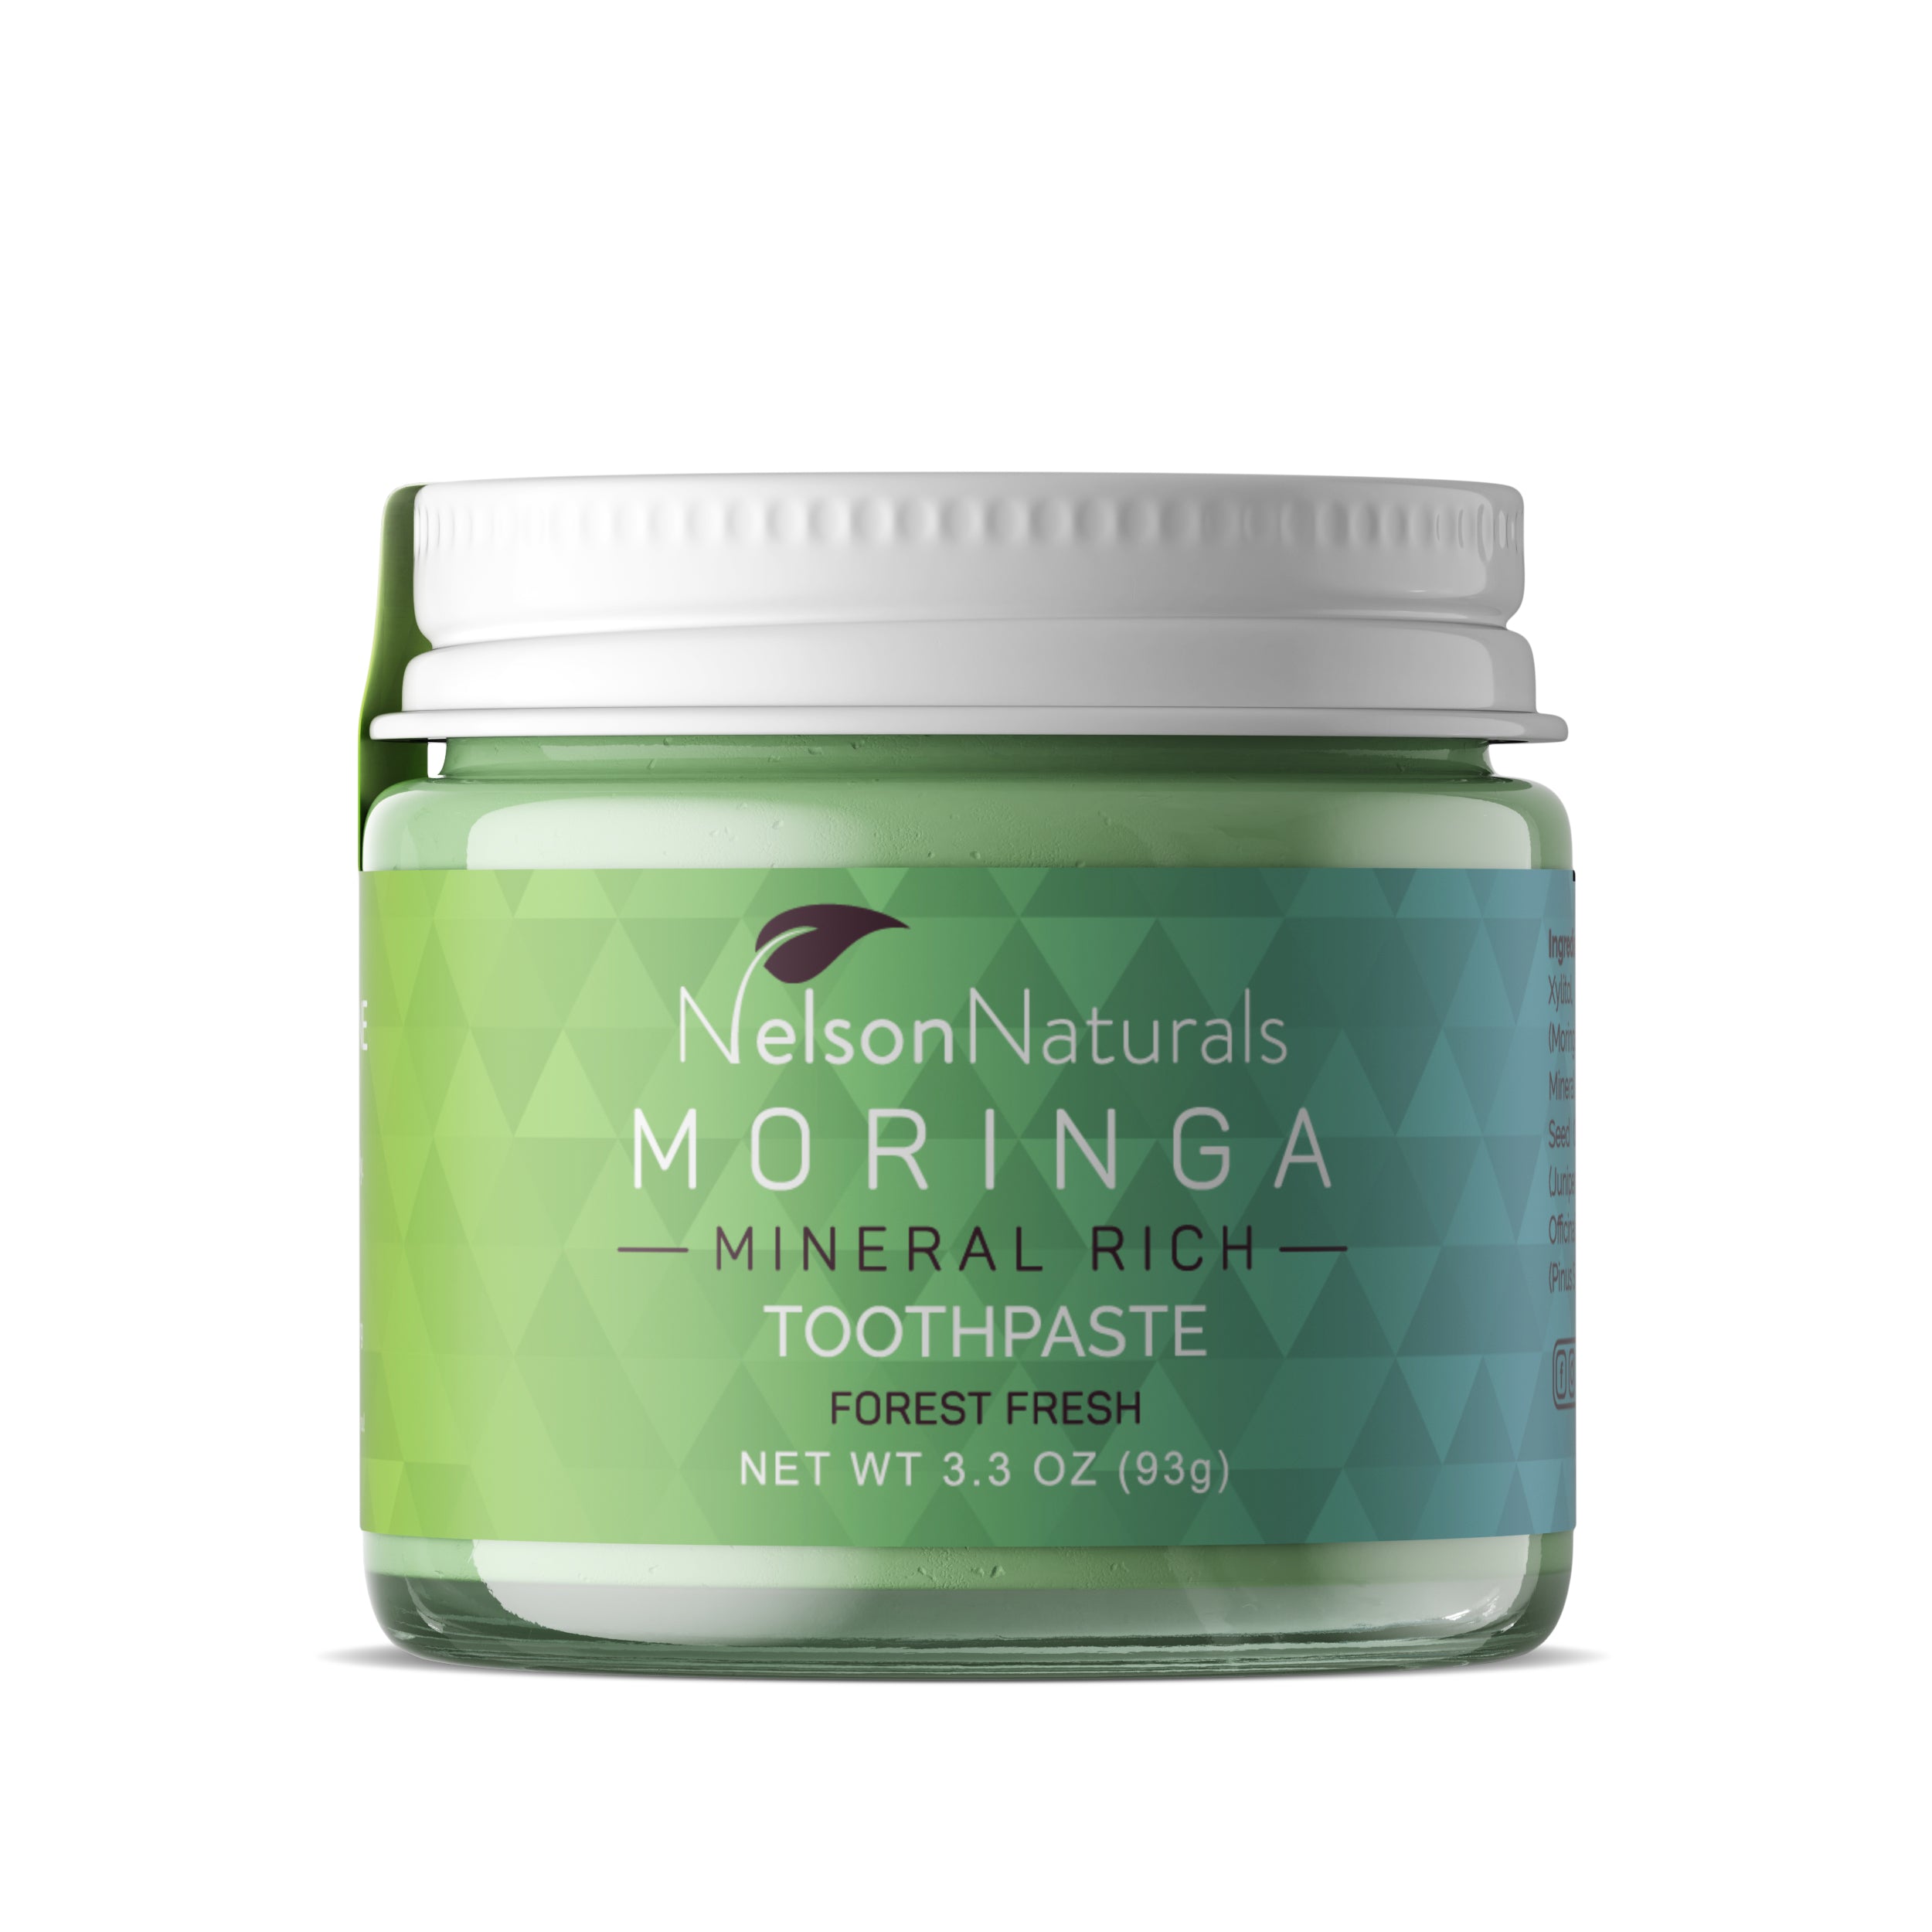 Moringa Mineral Rich Toothpaste - Forest Fresh 93g Toothpaste - nelsonnaturals remineralizing toothpaste